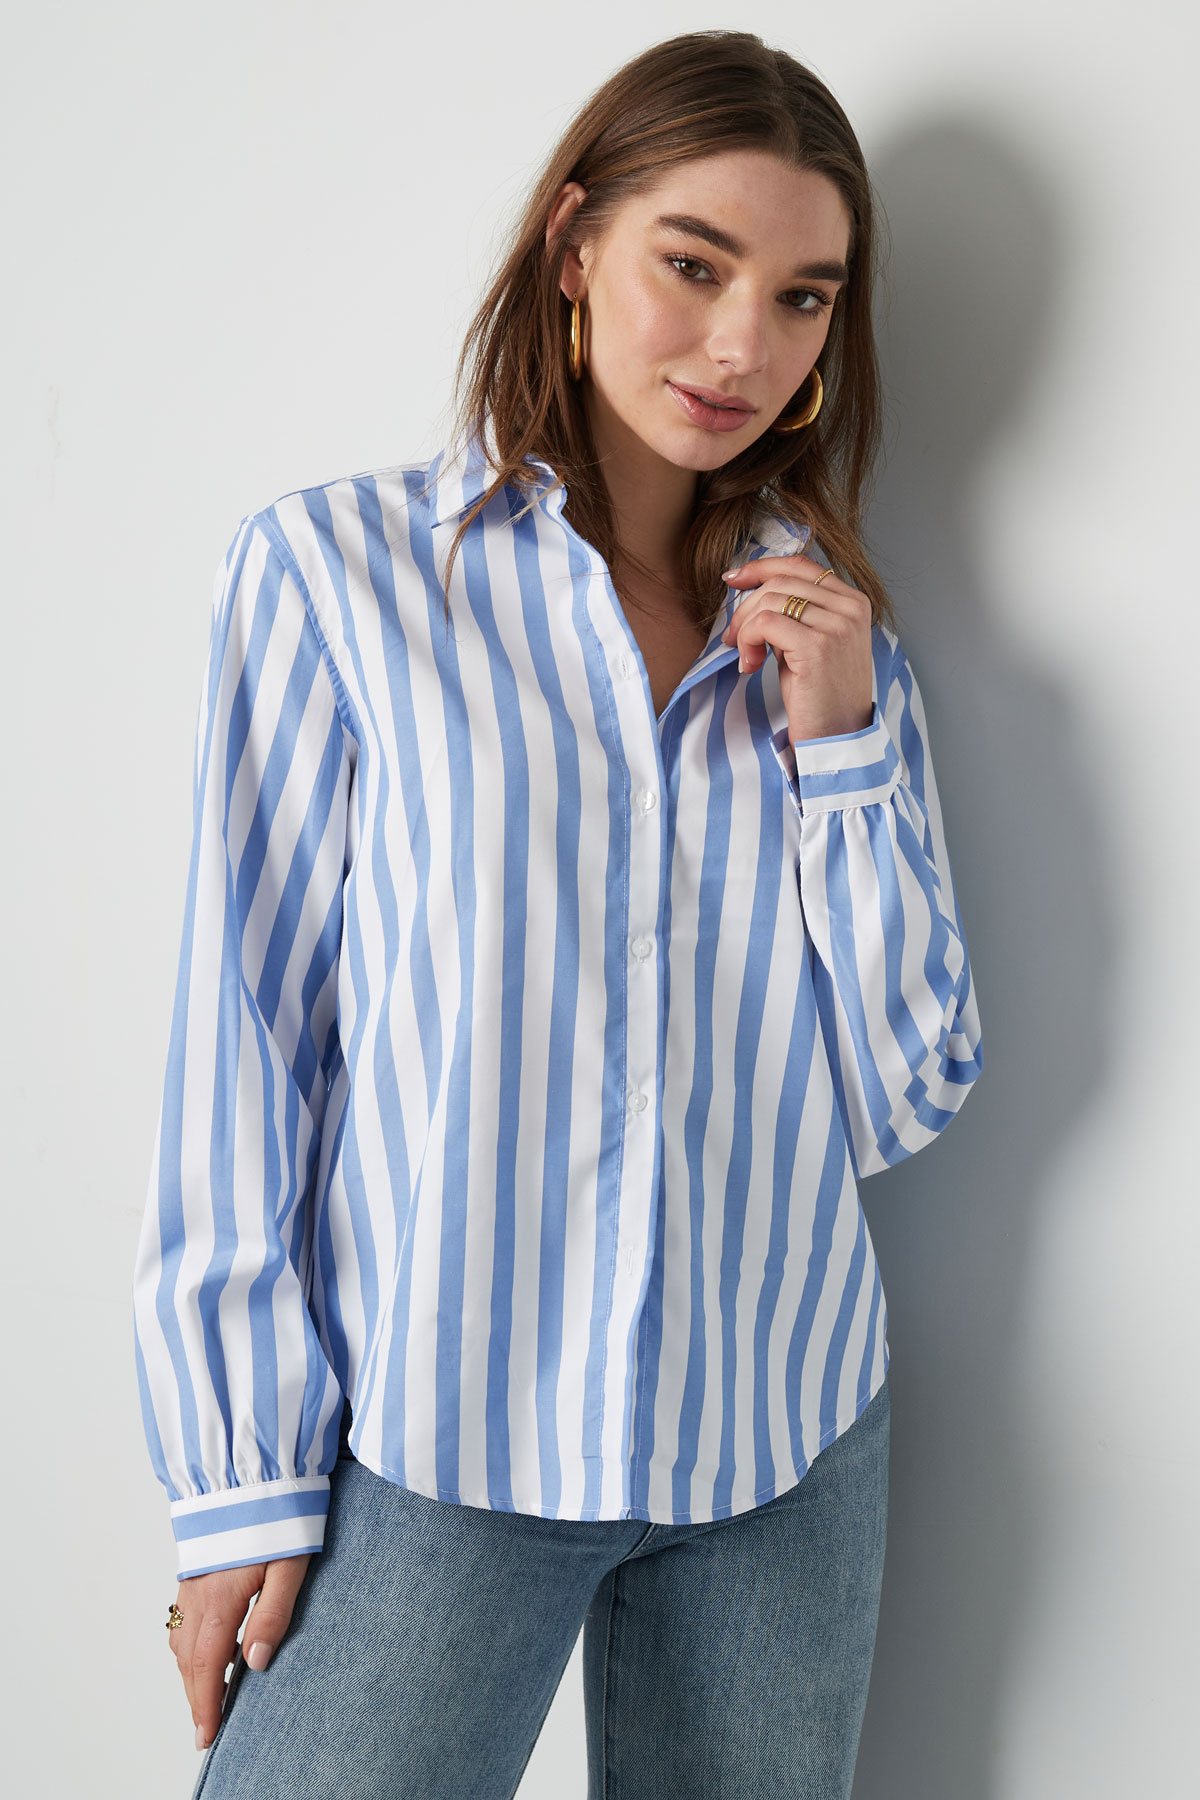 Striped casual blouse - black and white Picture6